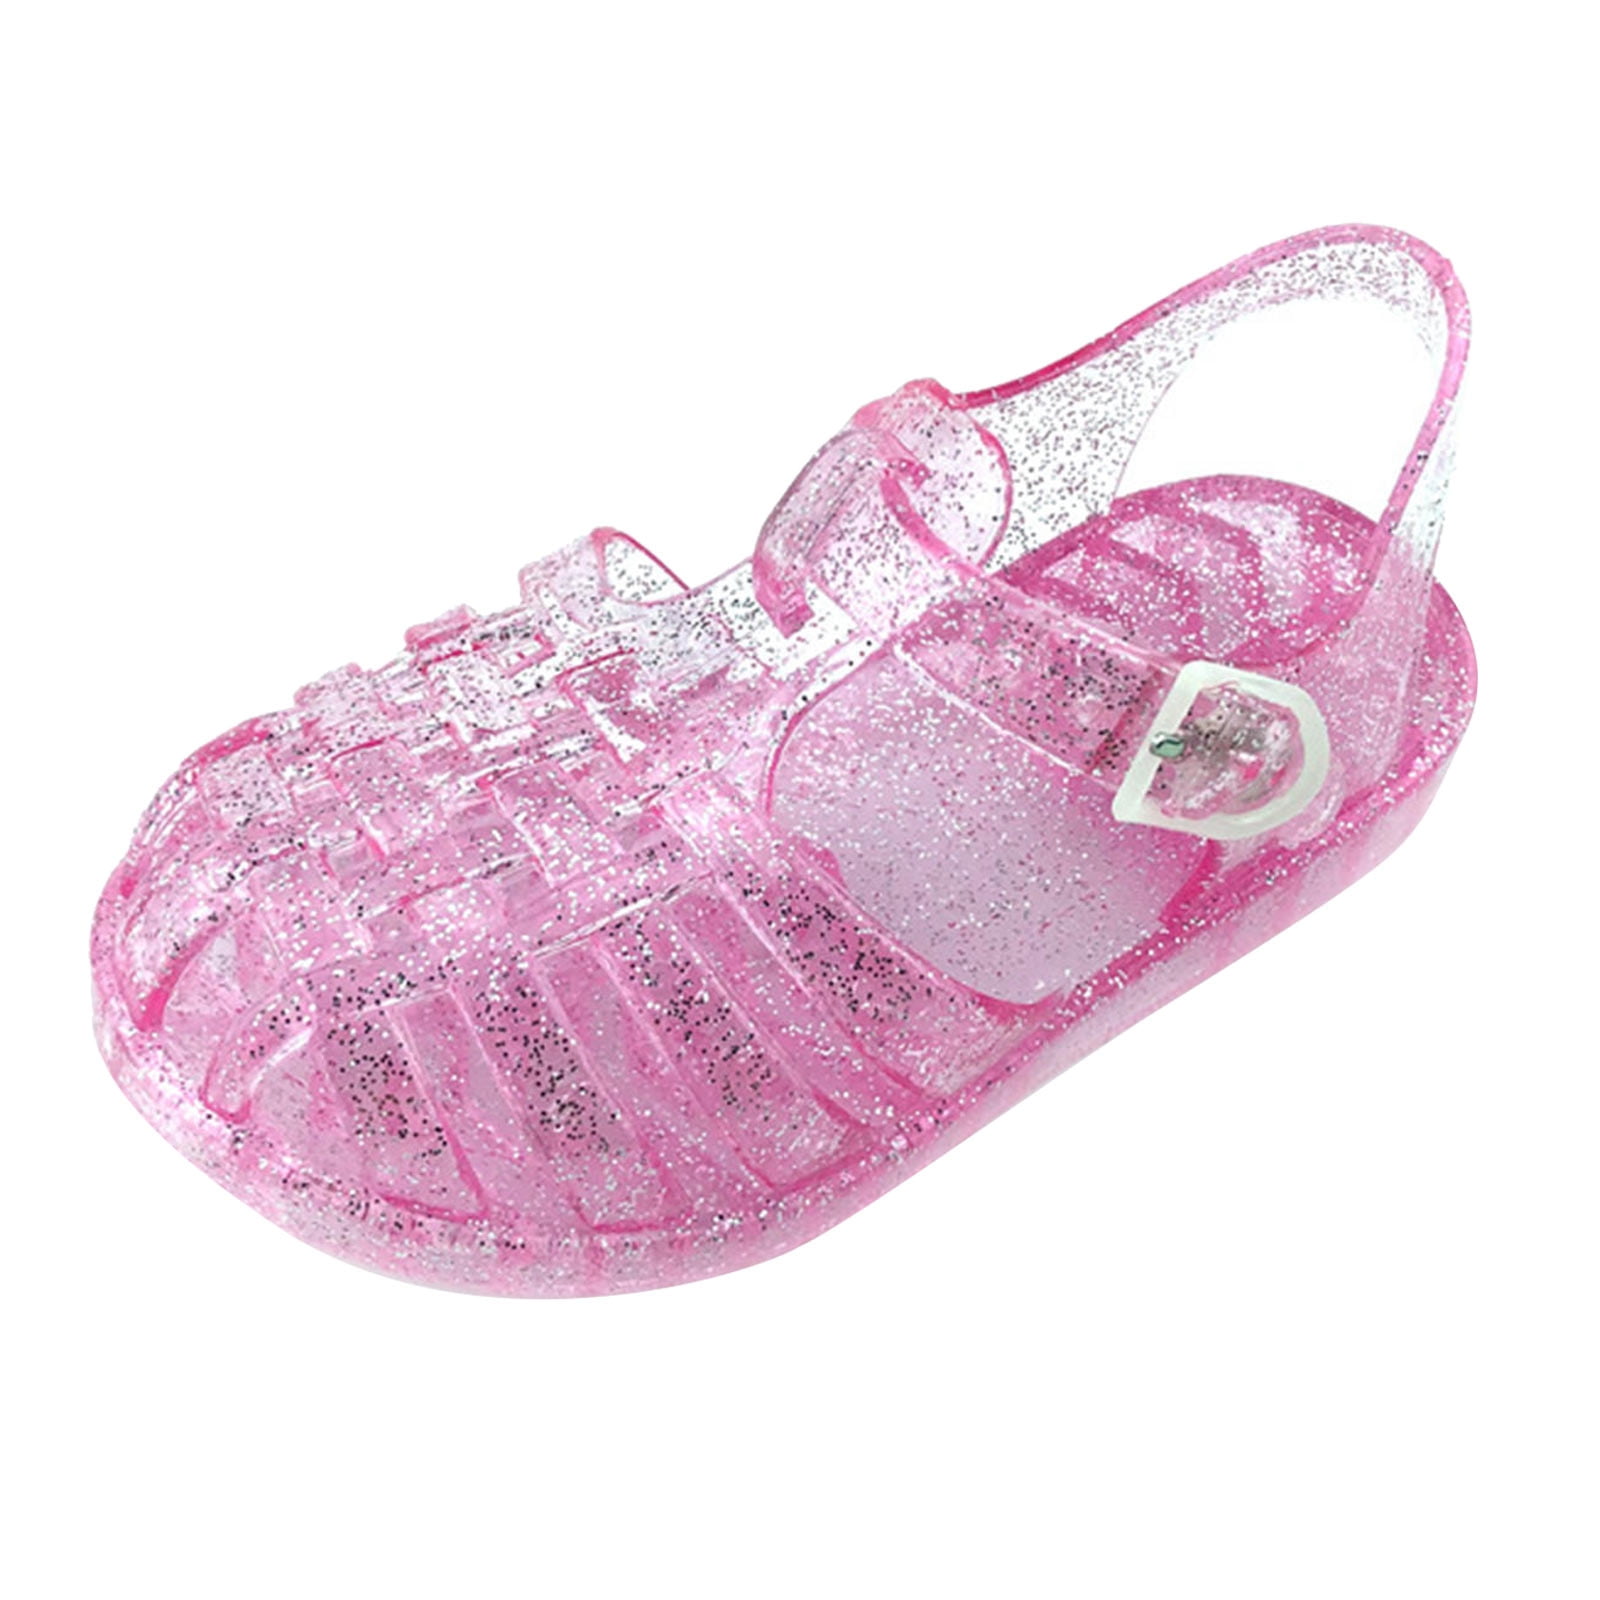 VerPetridure Kids Sandals Clearance Under $10 Toddler Shoes Baby Girls ...